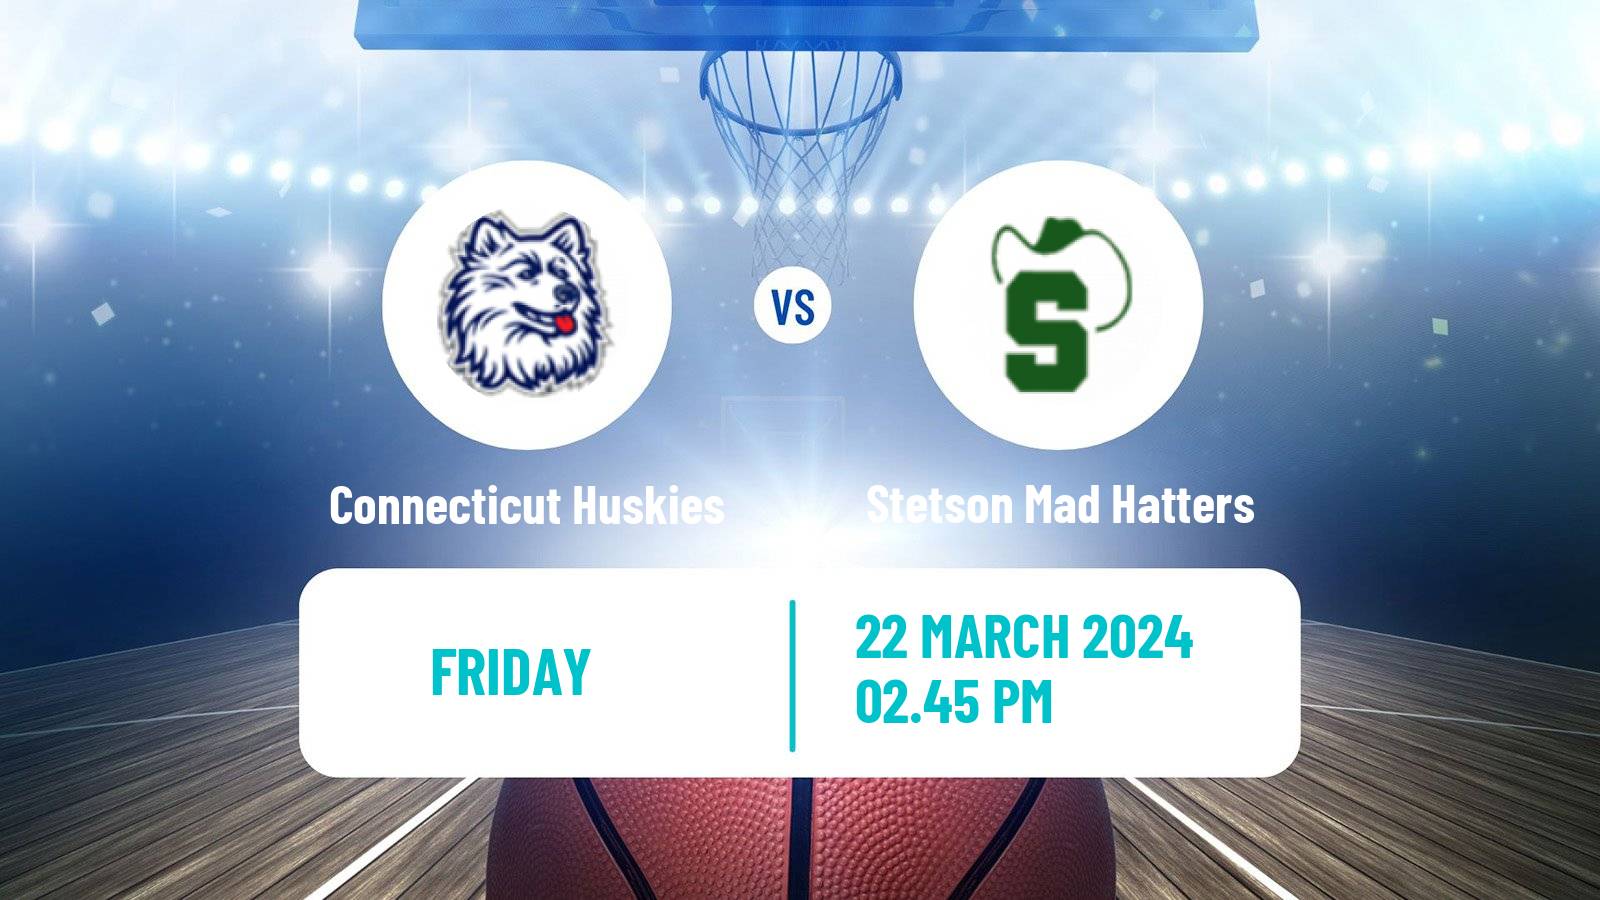 Basketball NCAA College Basketball Connecticut Huskies - Stetson Mad Hatters